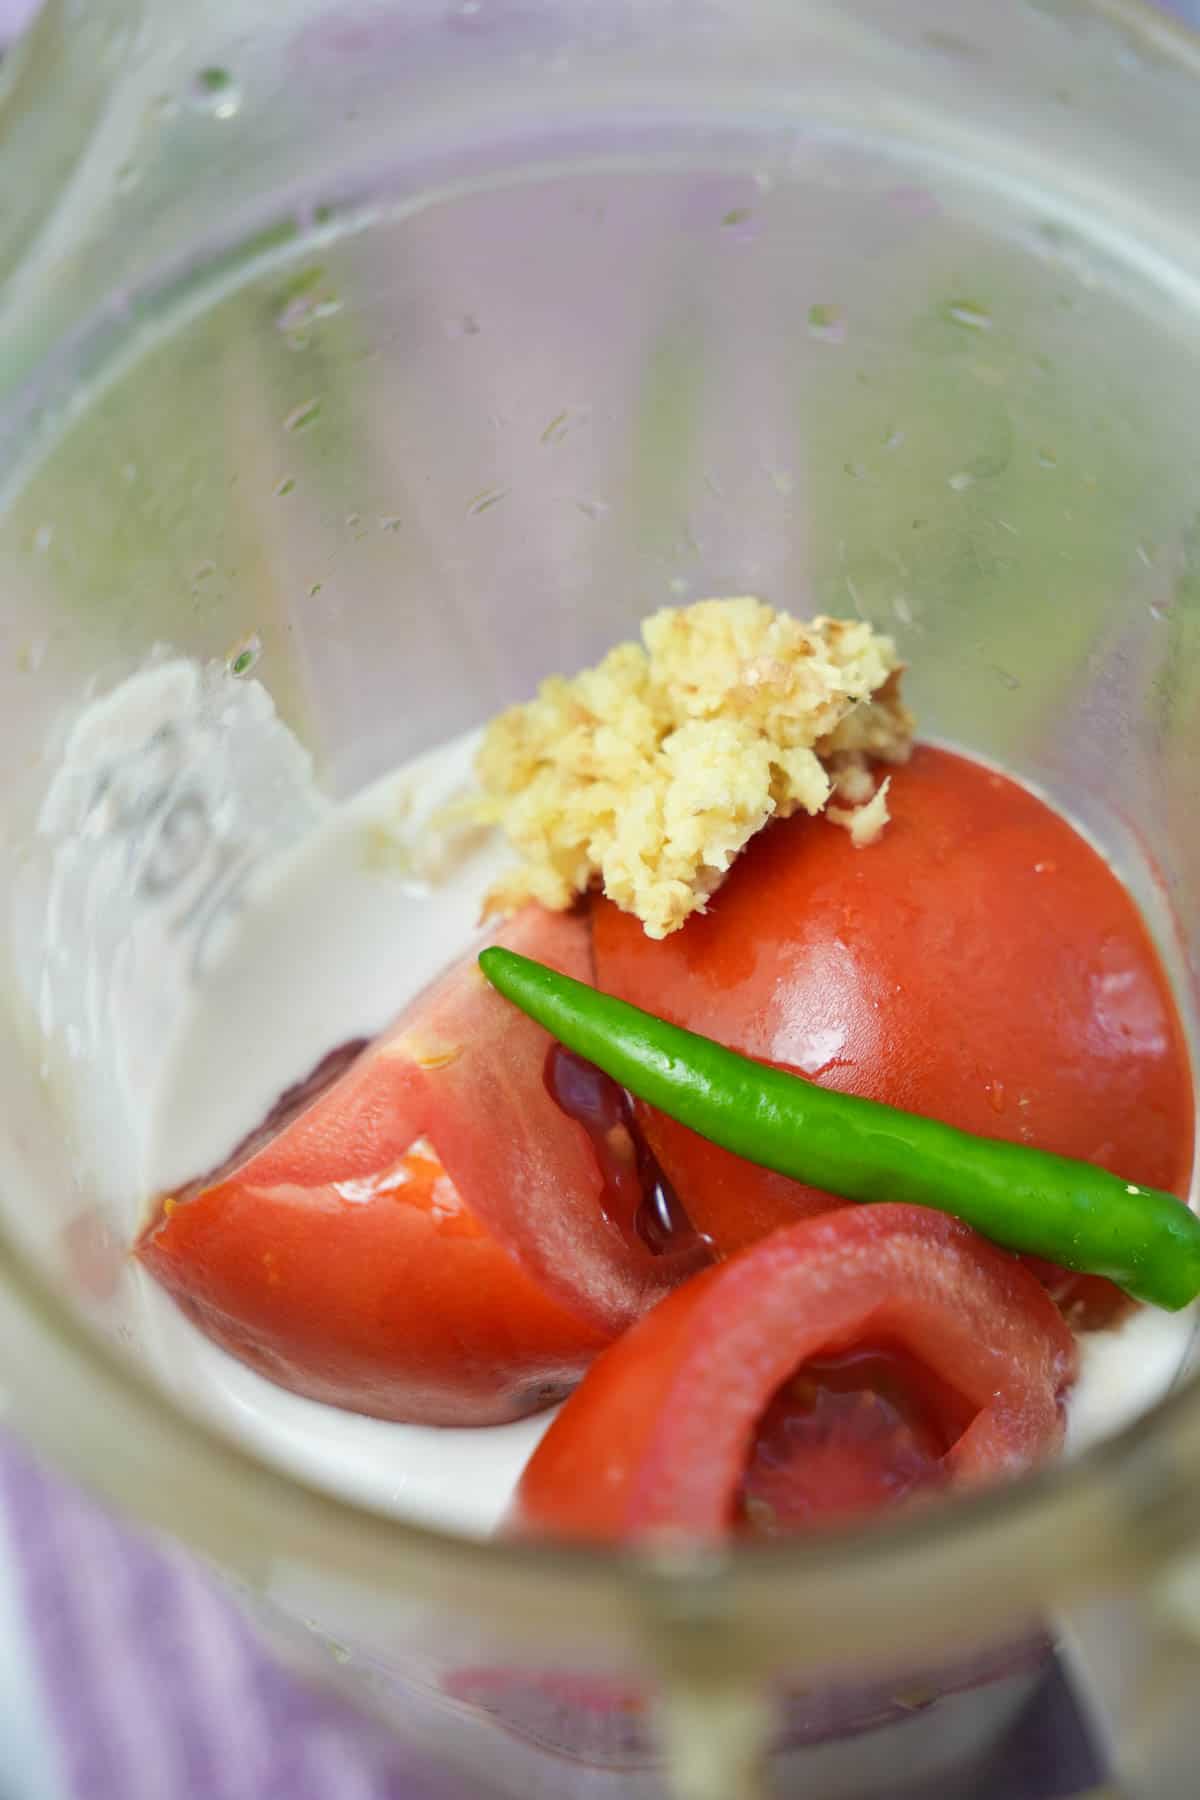 A blender filled with tomatoes, chilies, cashews and coconut milk.